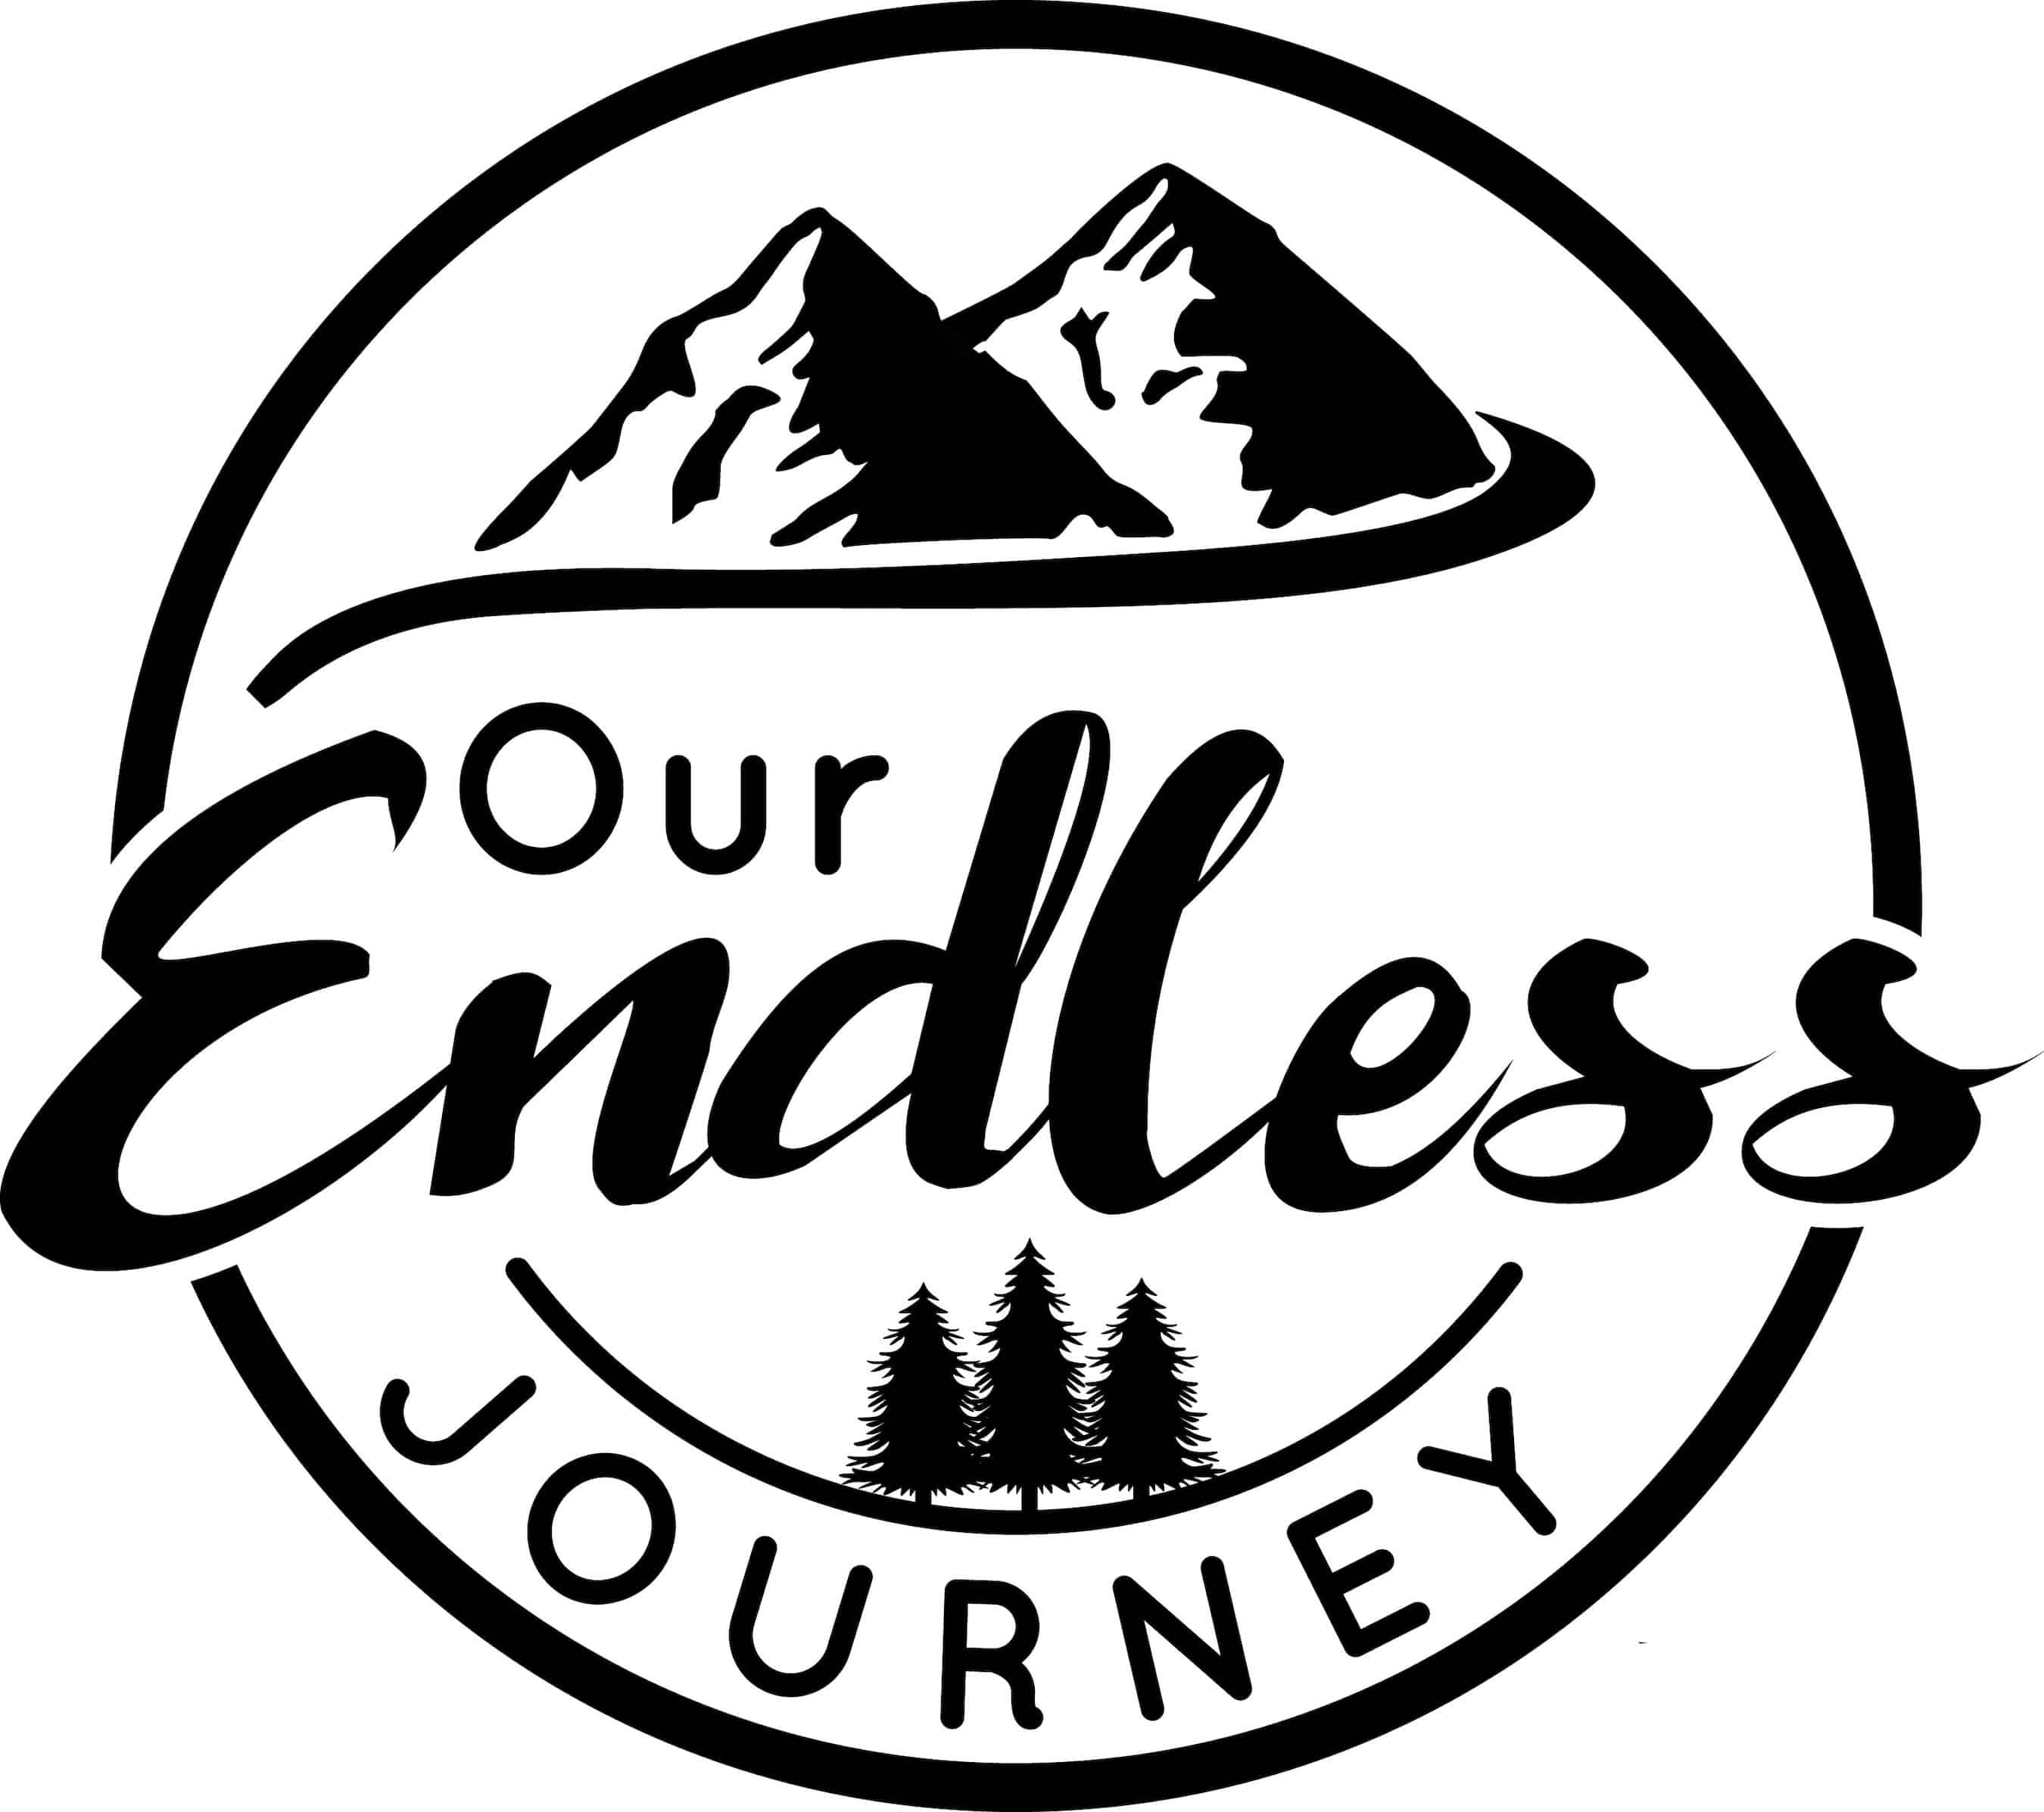 Our Endless Journey